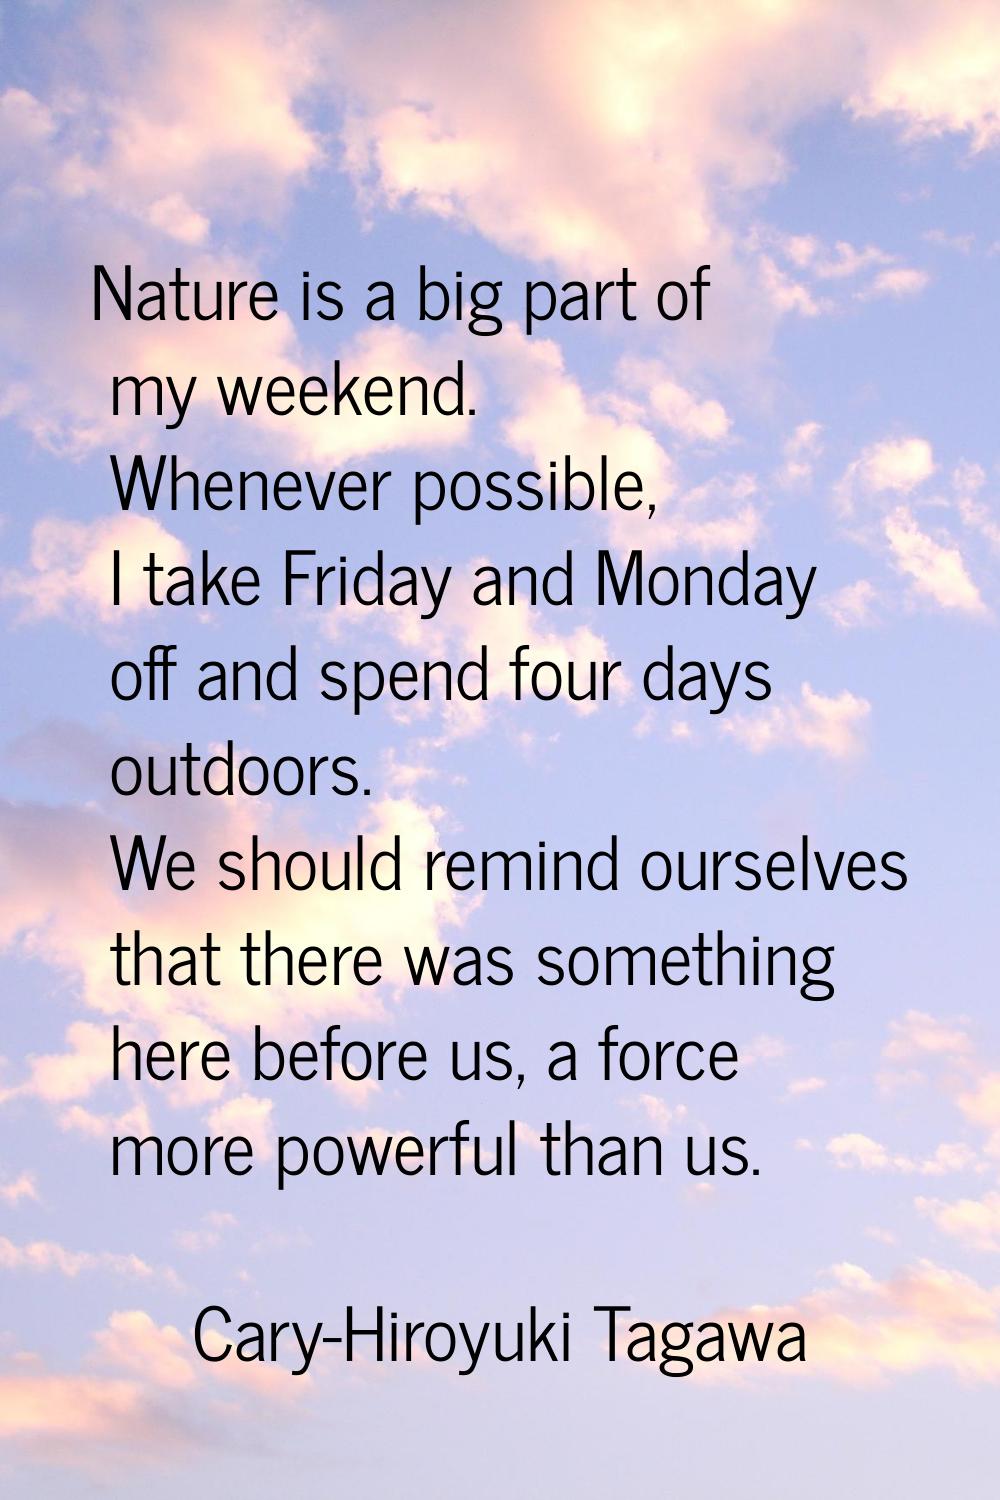 Nature is a big part of my weekend. Whenever possible, I take Friday and Monday off and spend four 